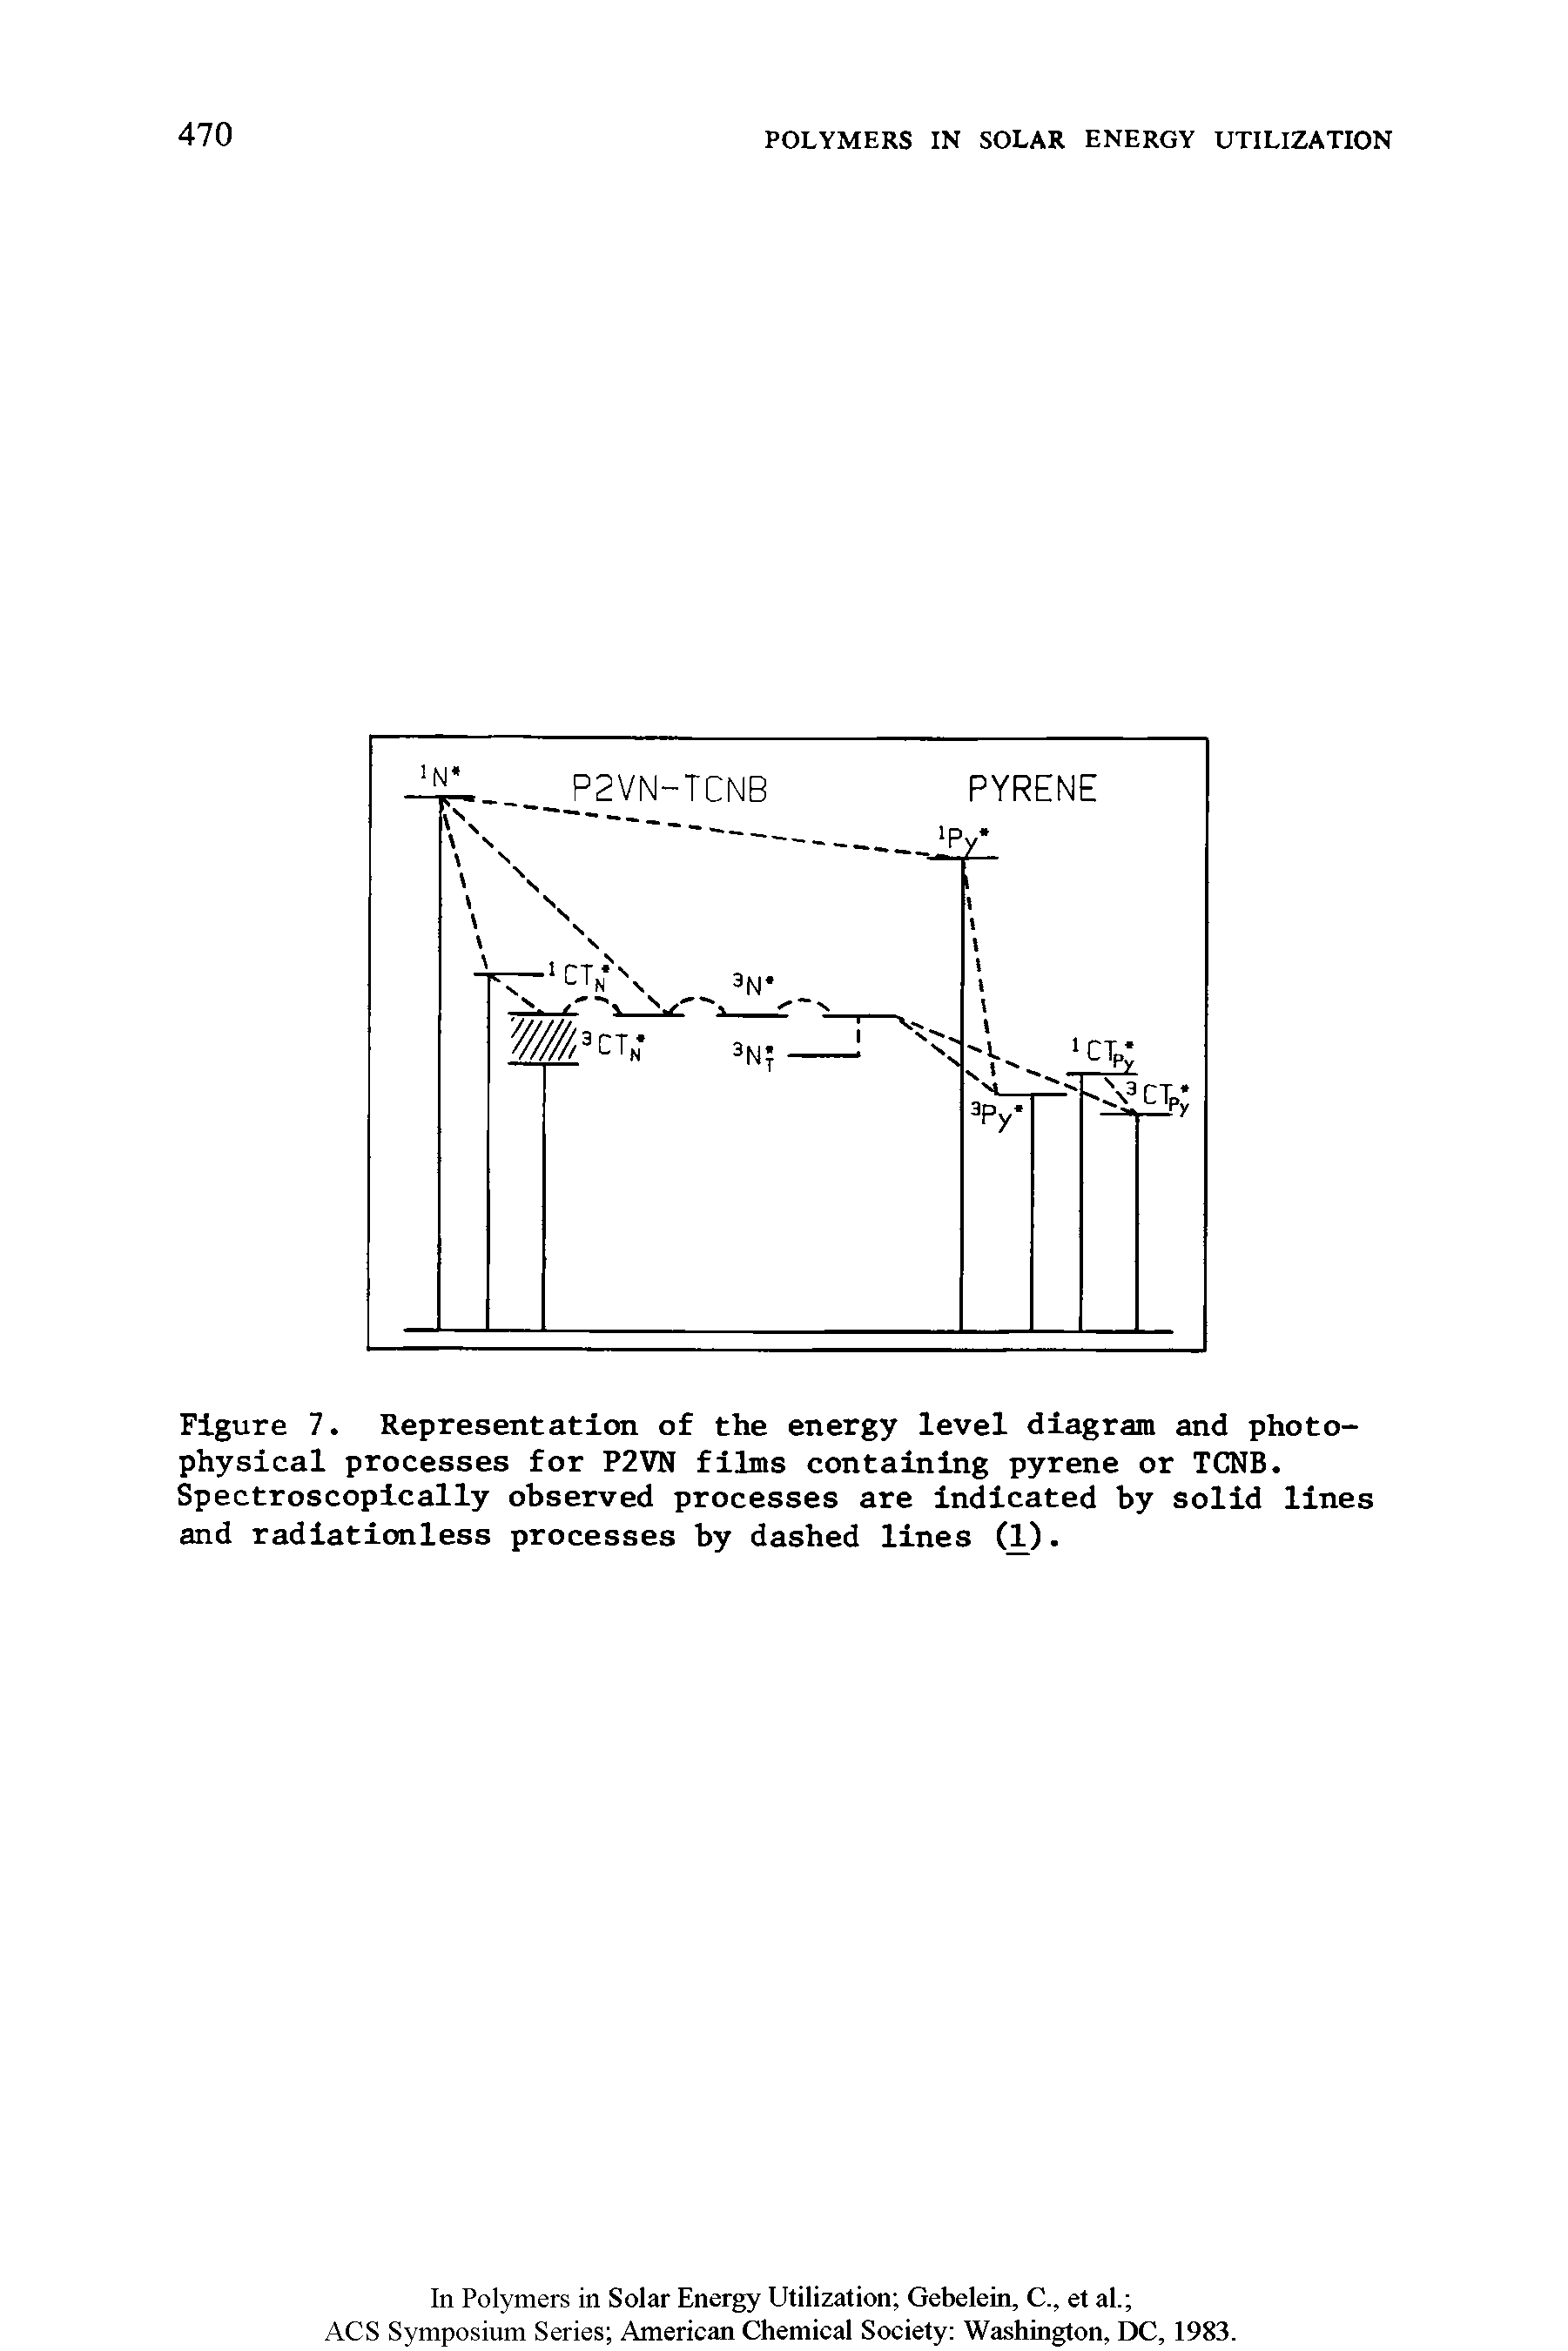 Figure 7. Representation of the energy level diagram and photophysical processes for P2VN films containing pyrene or TCNB. Spectroscopically observed processes are indicated by solid lines and radiationless processes by dashed lines (1).